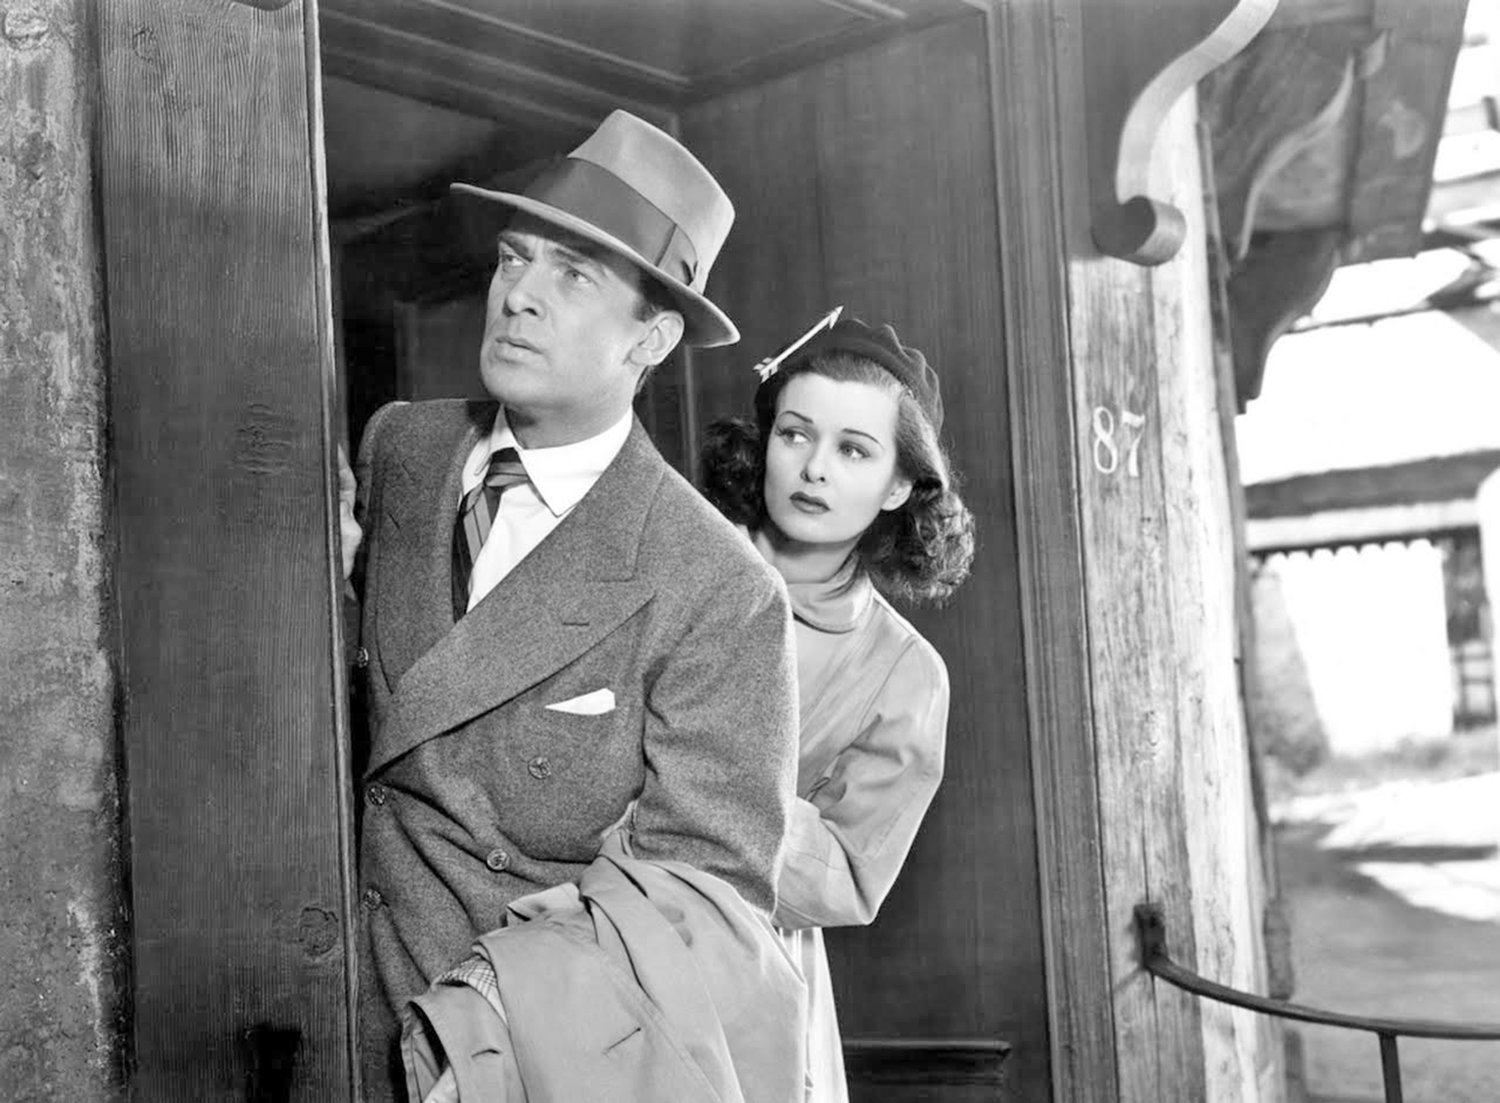 Capitolfest feature — Walter Pidgeon and Joan Bennett in a scene from “Man Hunt”